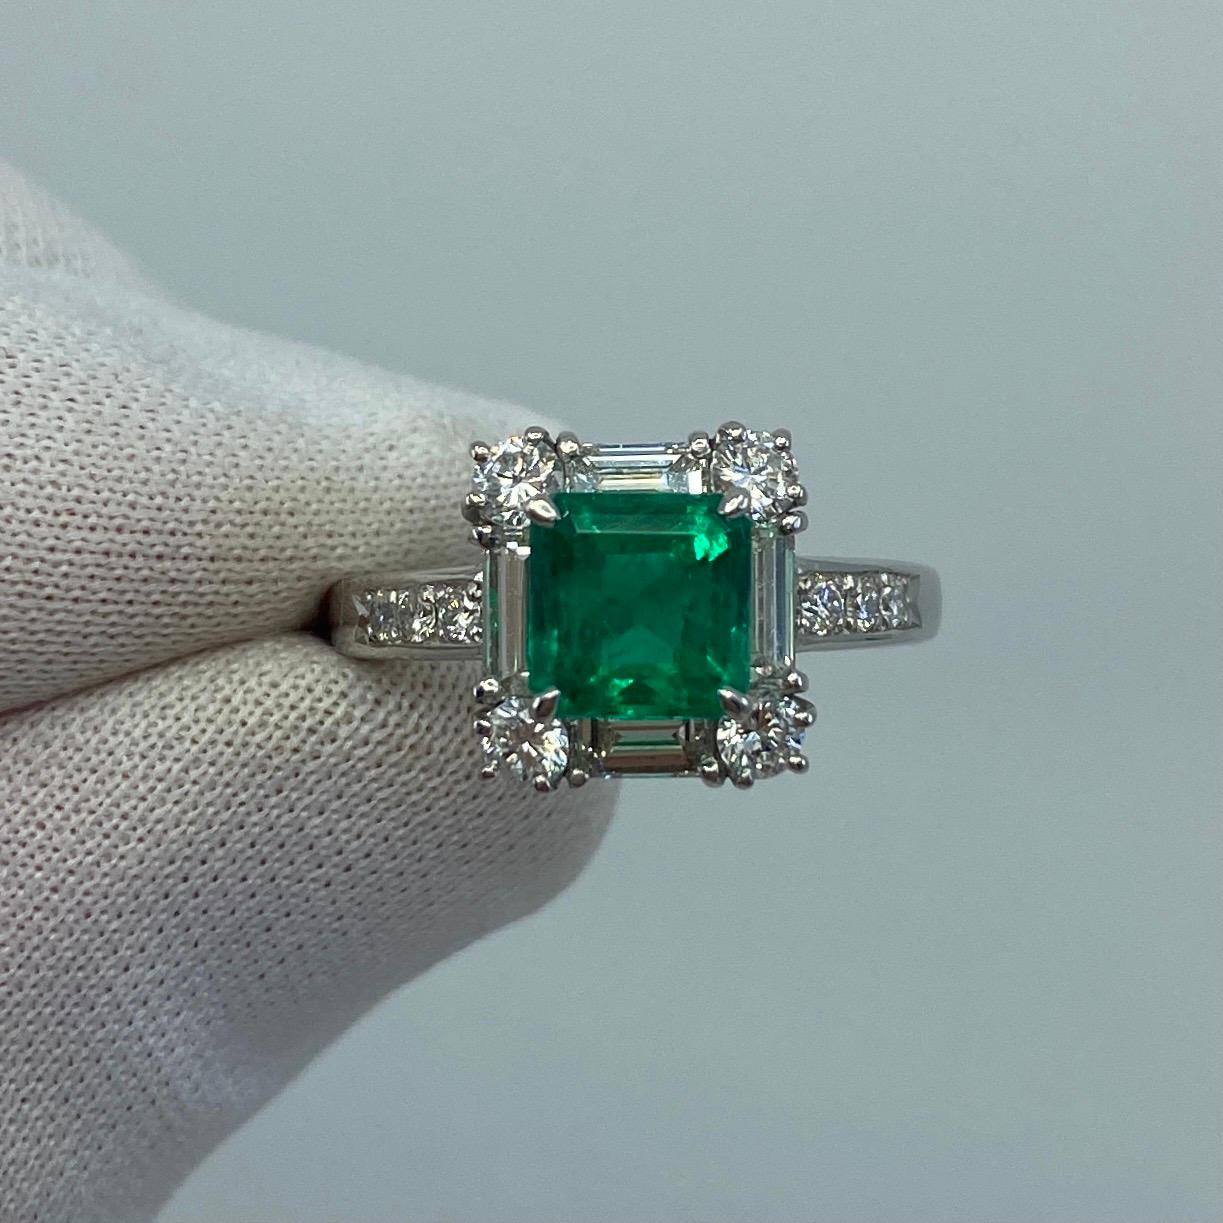 GIA Certified Vivid Green 2.23 Total Carat Colombian Emerald & Diamond Platinum Halo Ring.

1.13 Carat fine emerald with a stunning intense vivid green colour and excellent clarity.
Incredibly clean stone by emerald standards, also with excellent